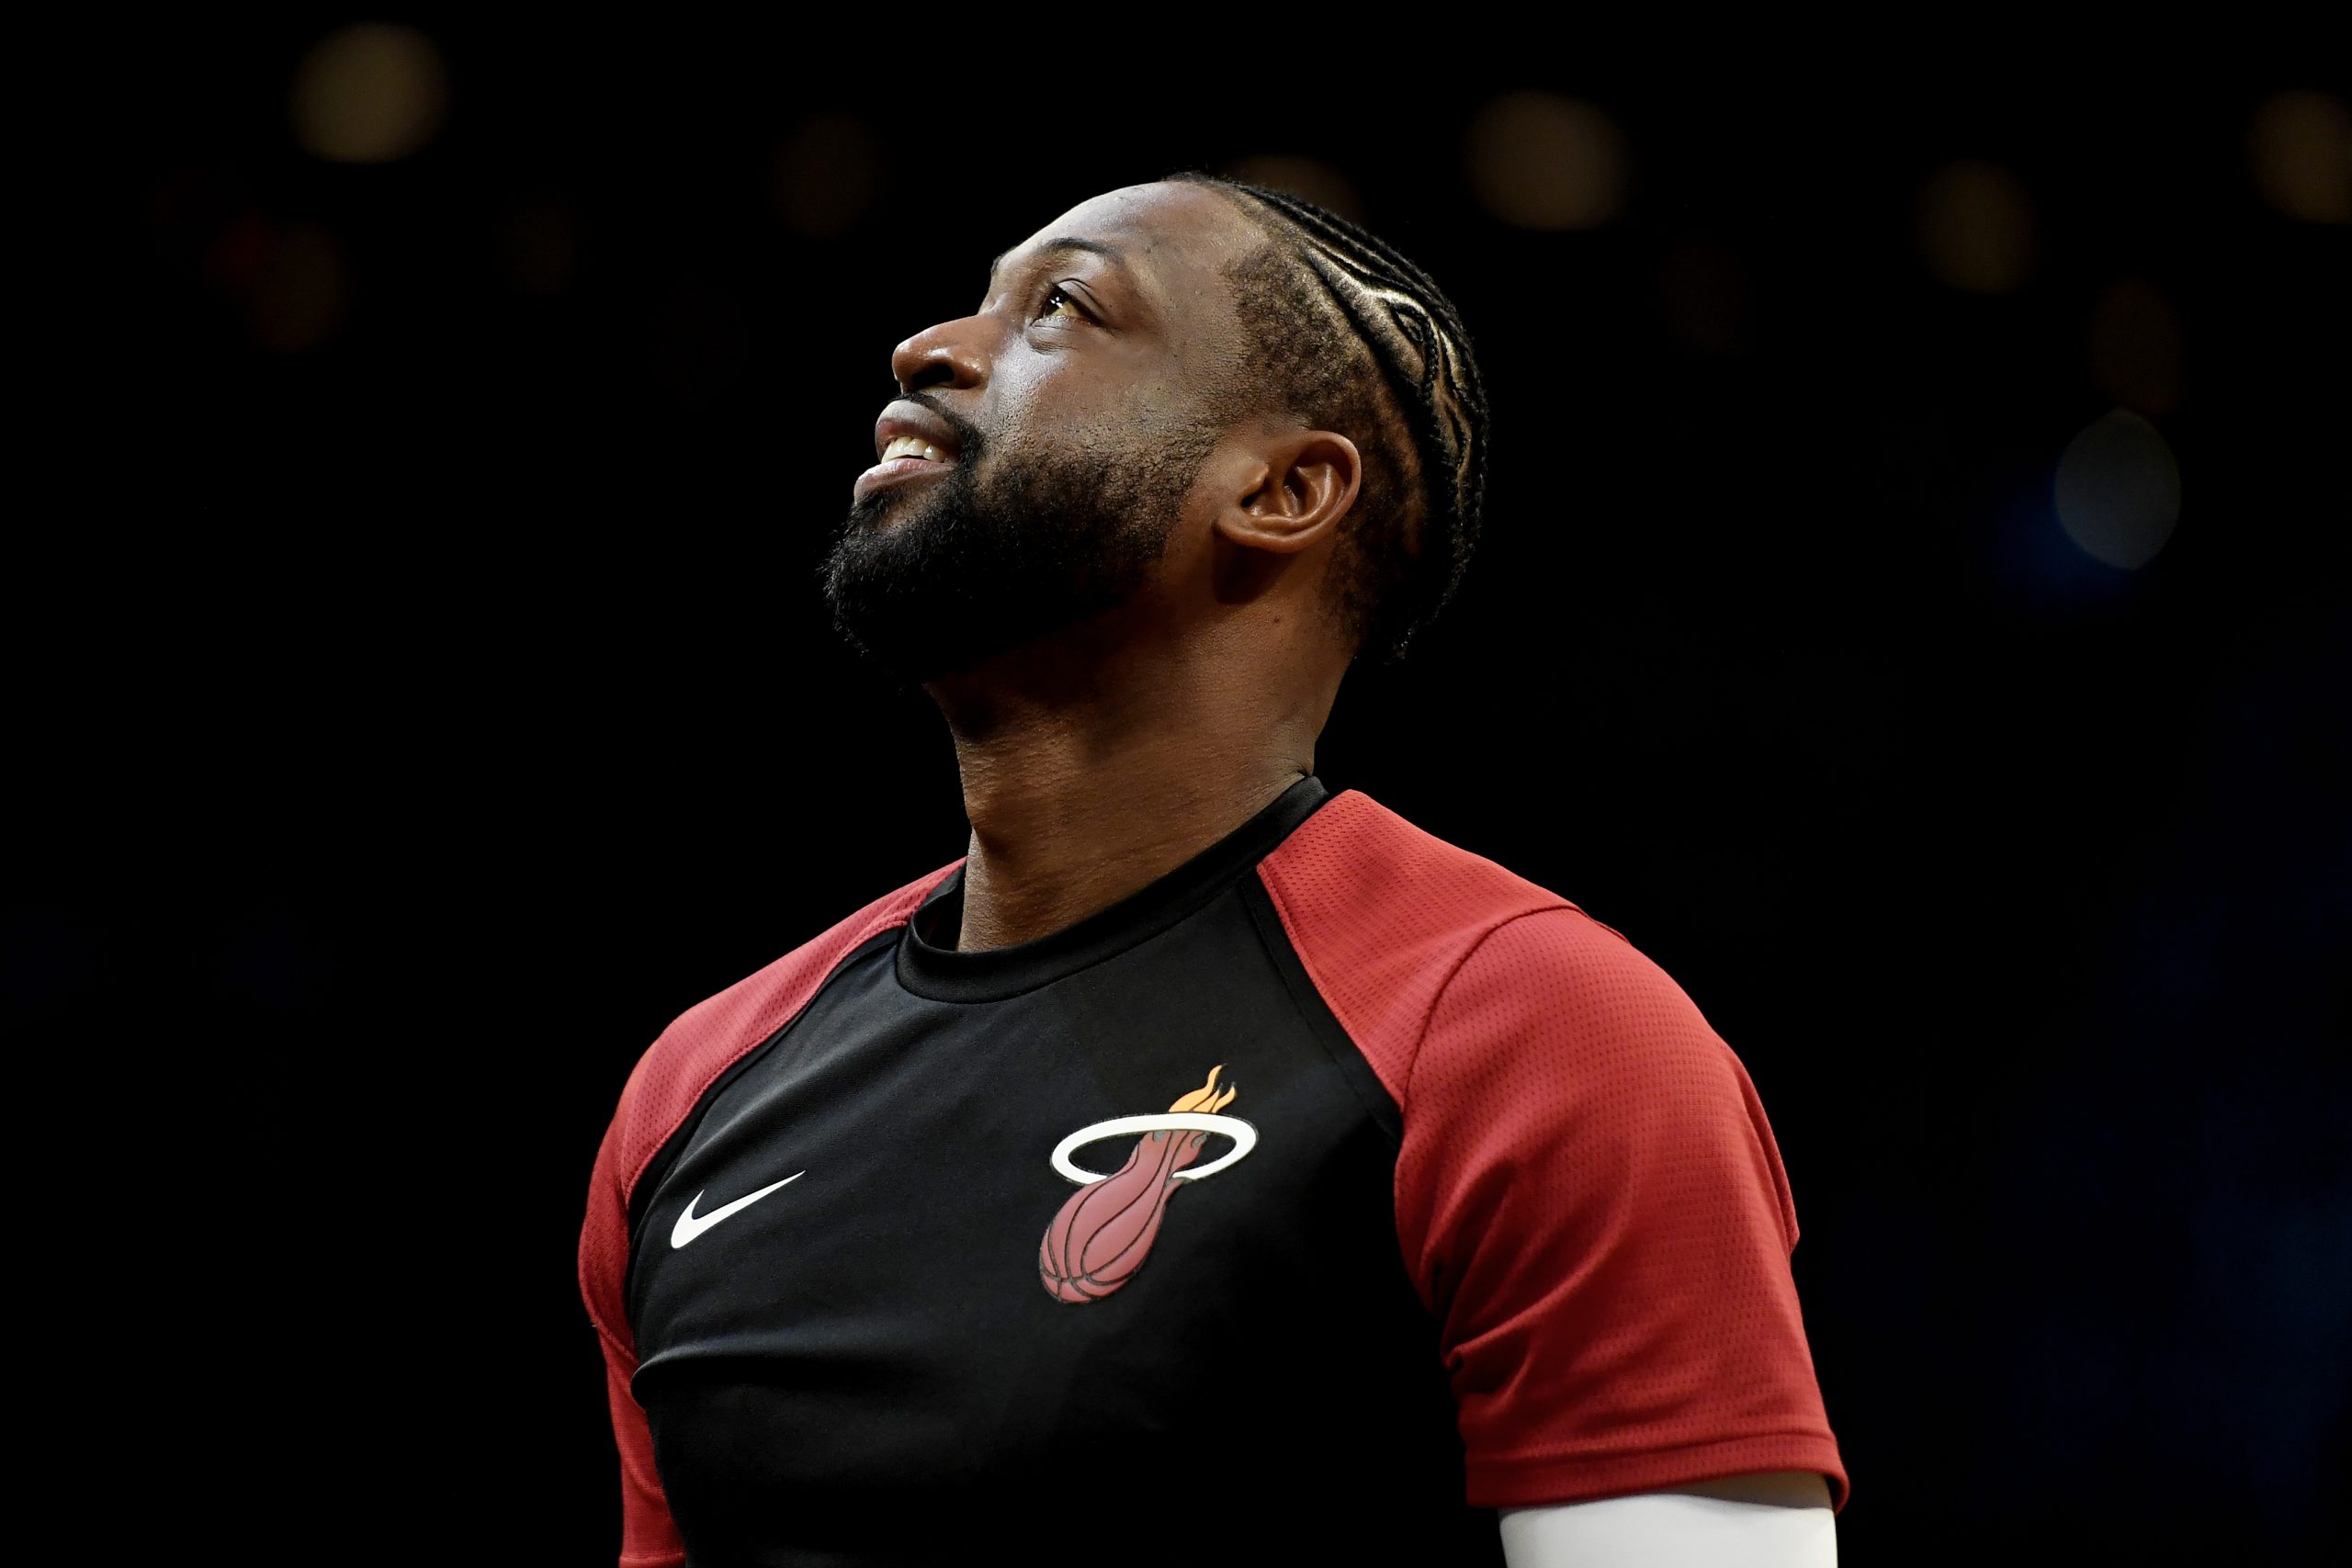 Dwyane Wade Reflects on His NBA Career, 'Shifting the Culture' in